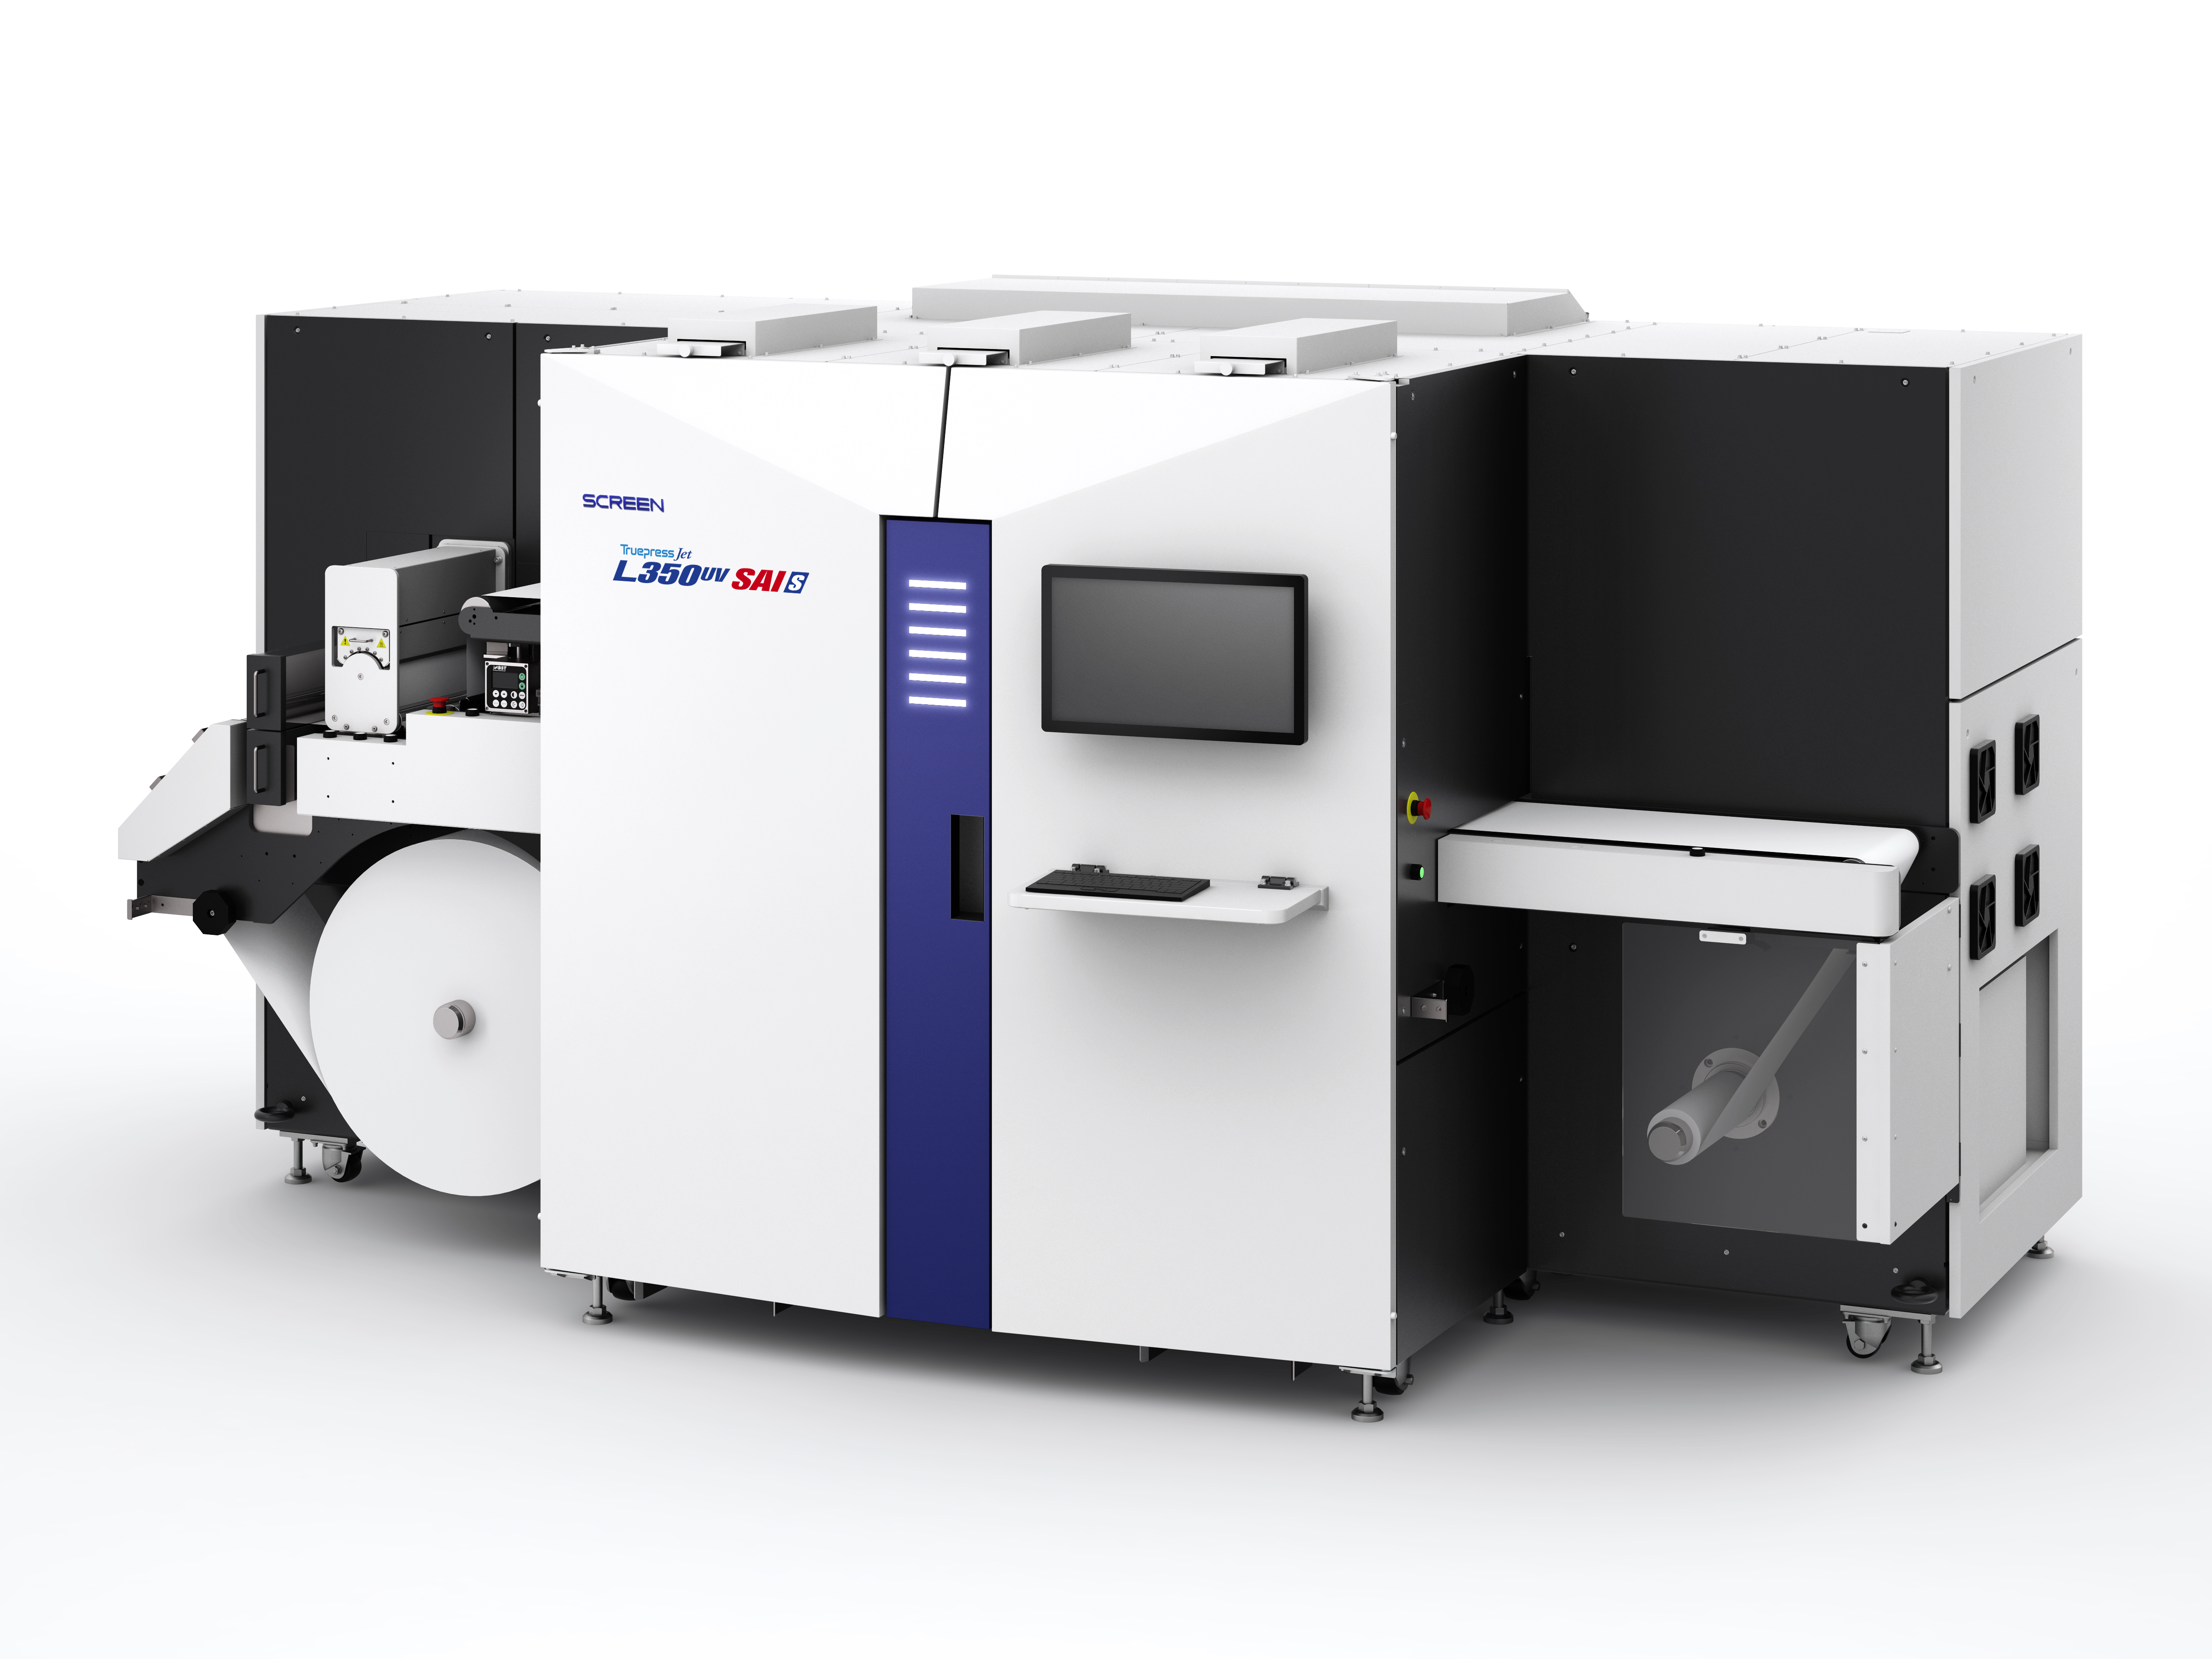 Image from SCREEN and Jet Technologies to demonstrate Truepress L350UV SAI, 7-colour label press at Pacprint 21